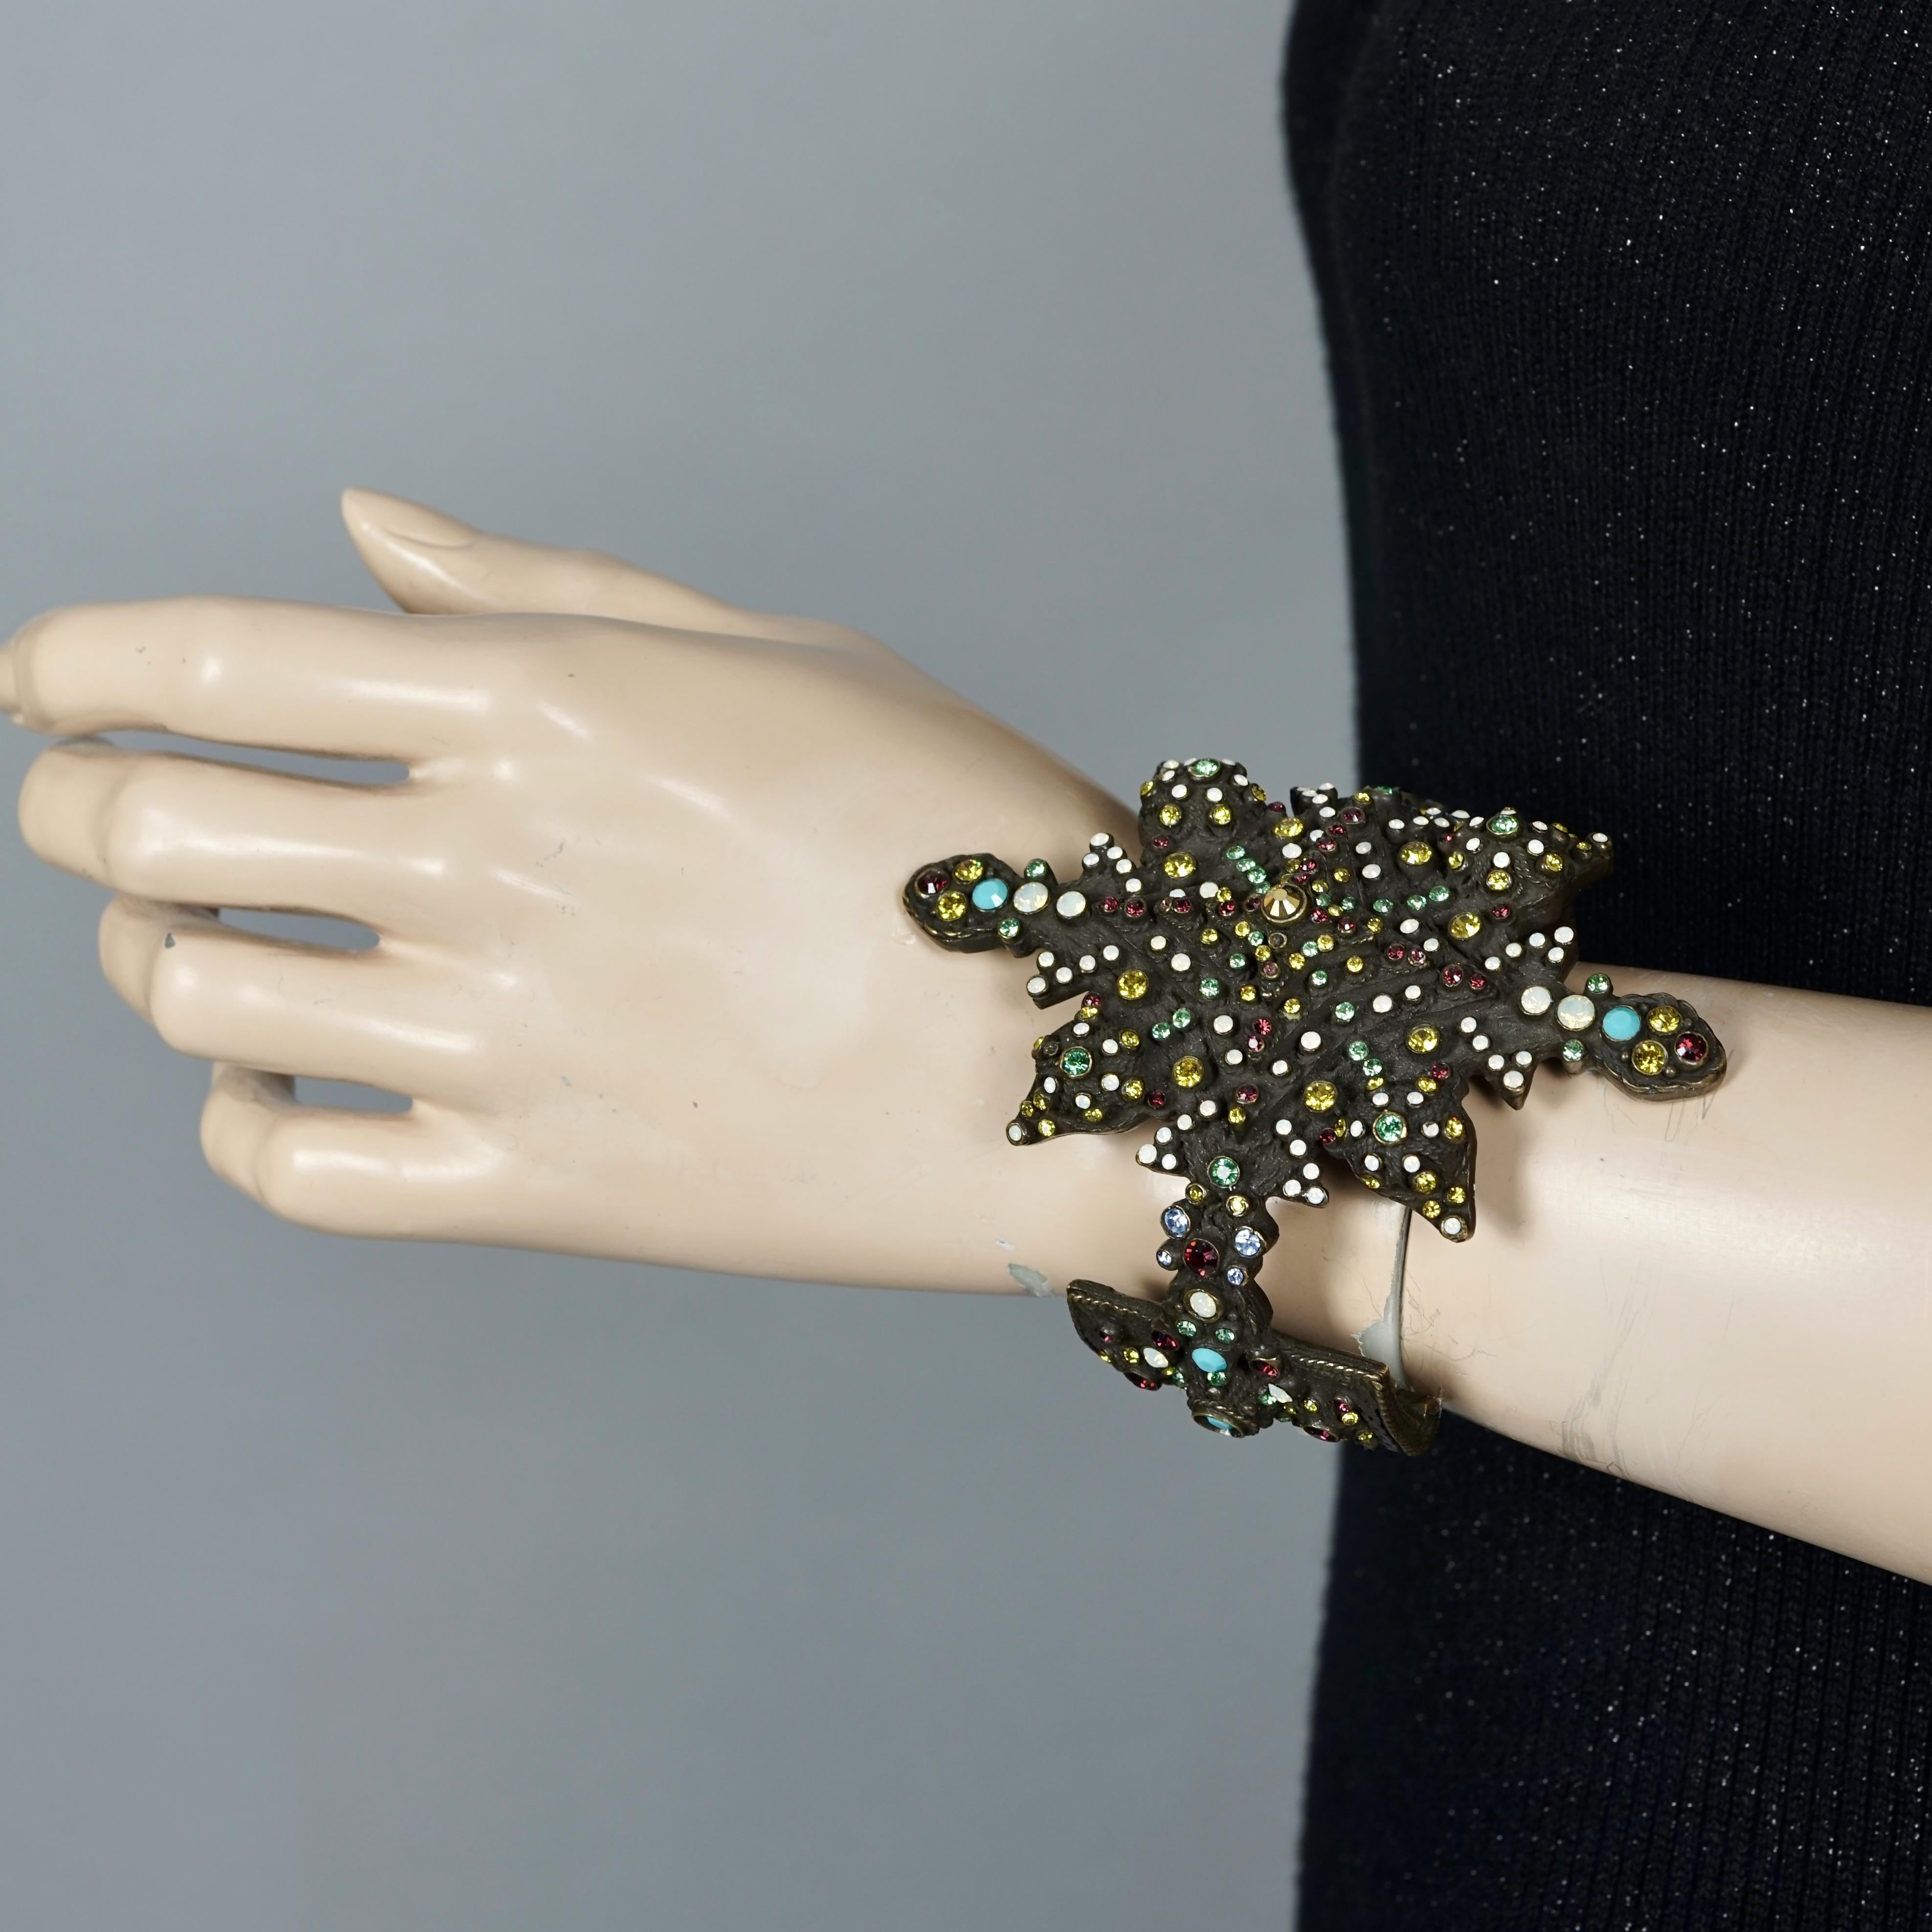 Vintage JEAN PAUL GAULTIER Gothic Jeweled Cuff Bracelet

Measurements:
Height: 3.77 inches (9.6 cm)
Width: 2.91 inches (7.4 cm)
Inner Circumference: 7.99 inches (16.5 cm)

Features:
- 100% Authentic JEAN PAUL GAULTIER.
- Gothic cuff studded with